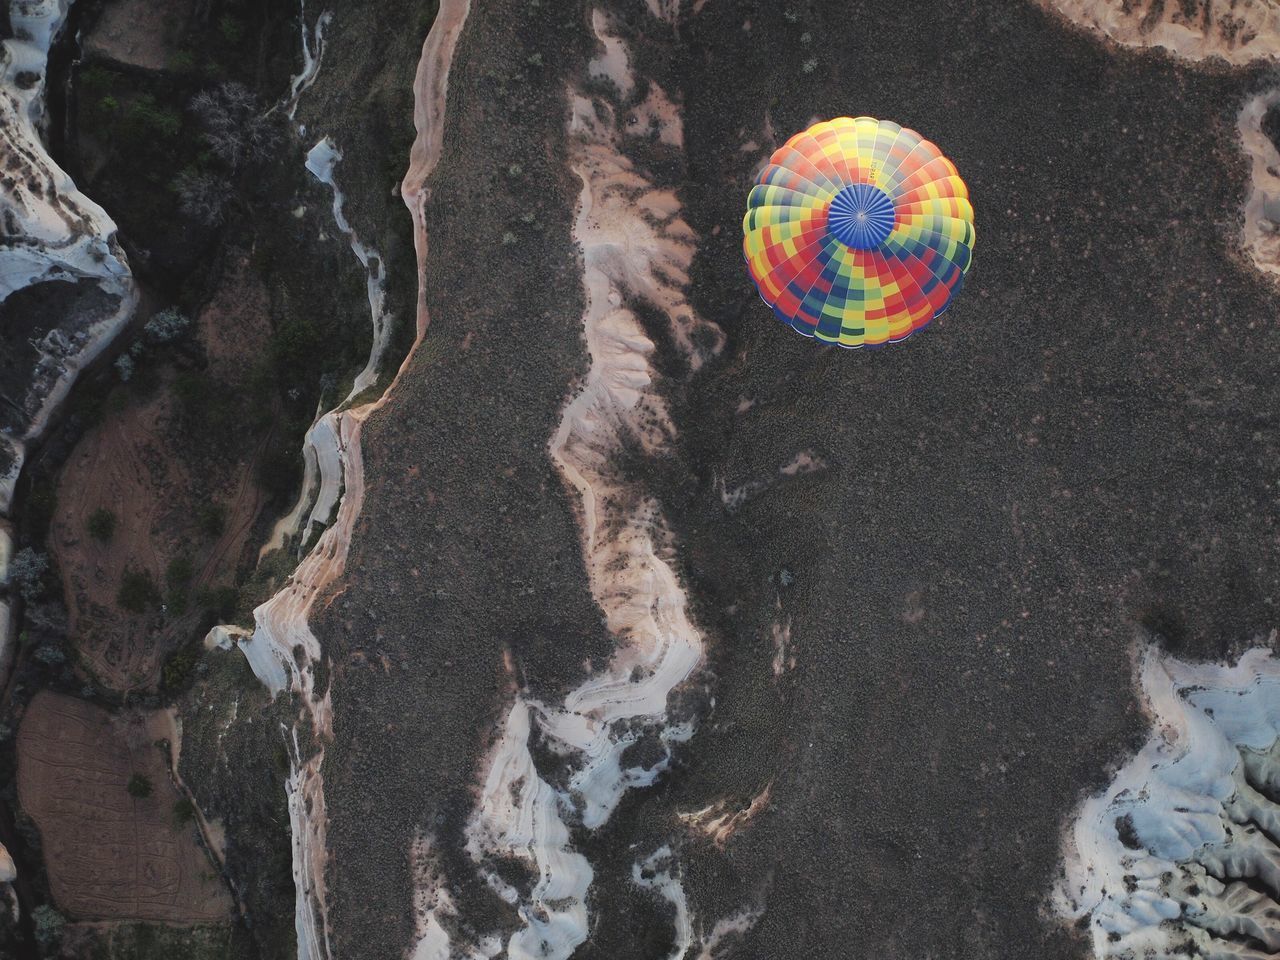 HIGH ANGLE VIEW OF MULTI COLORED BUBBLES